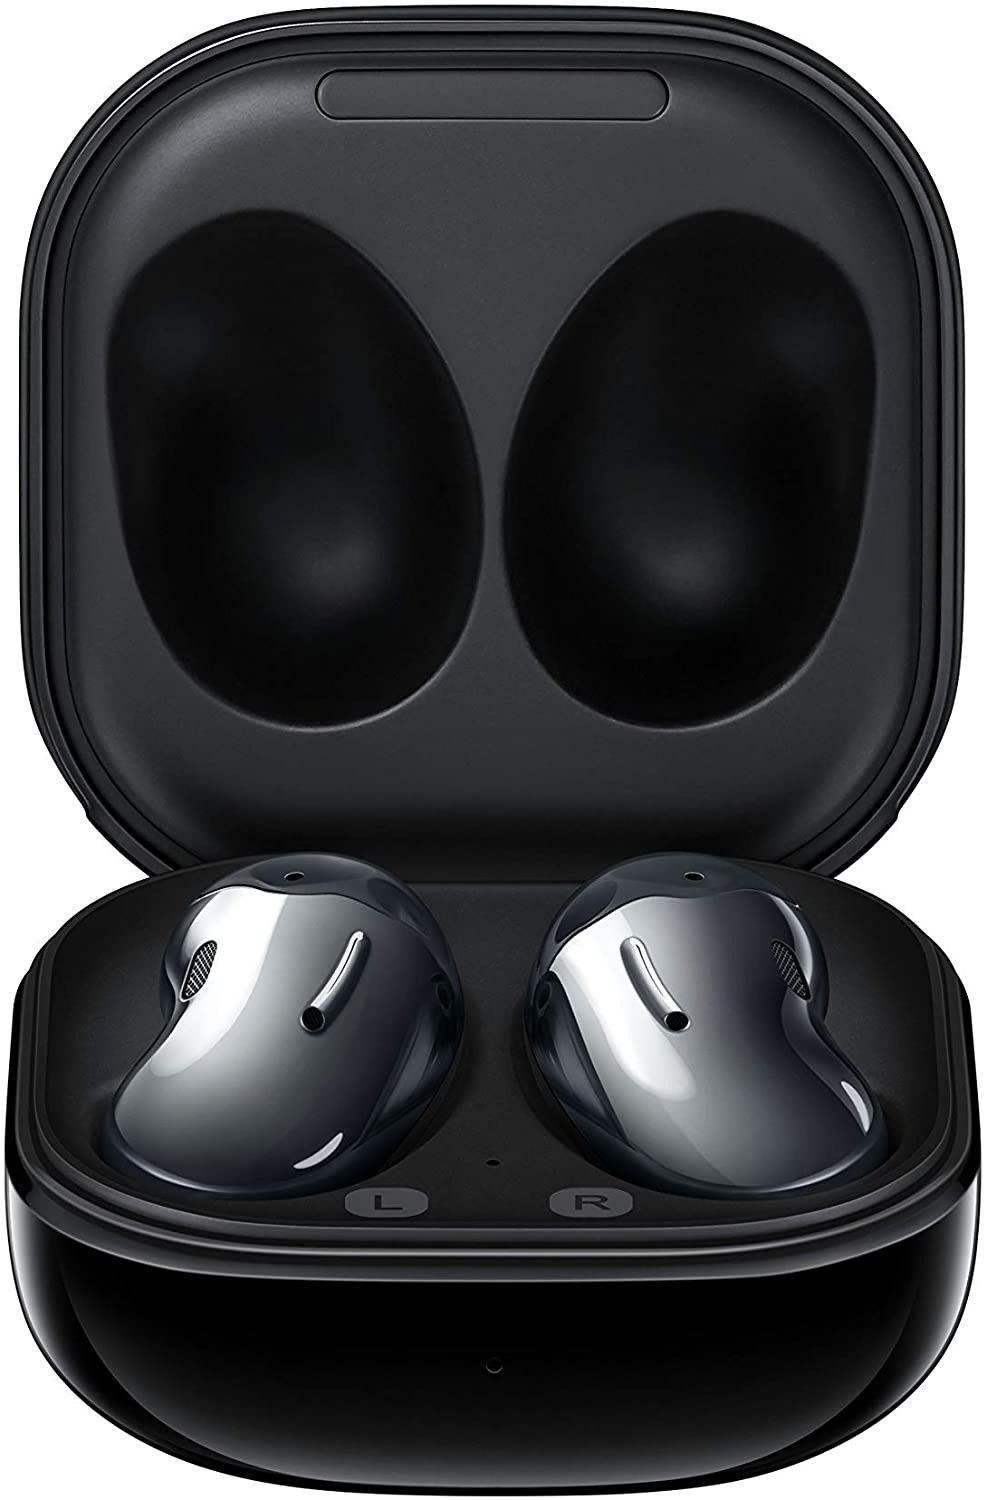 Mystic Black Wireless Earbuds with Active Noise Cancelling